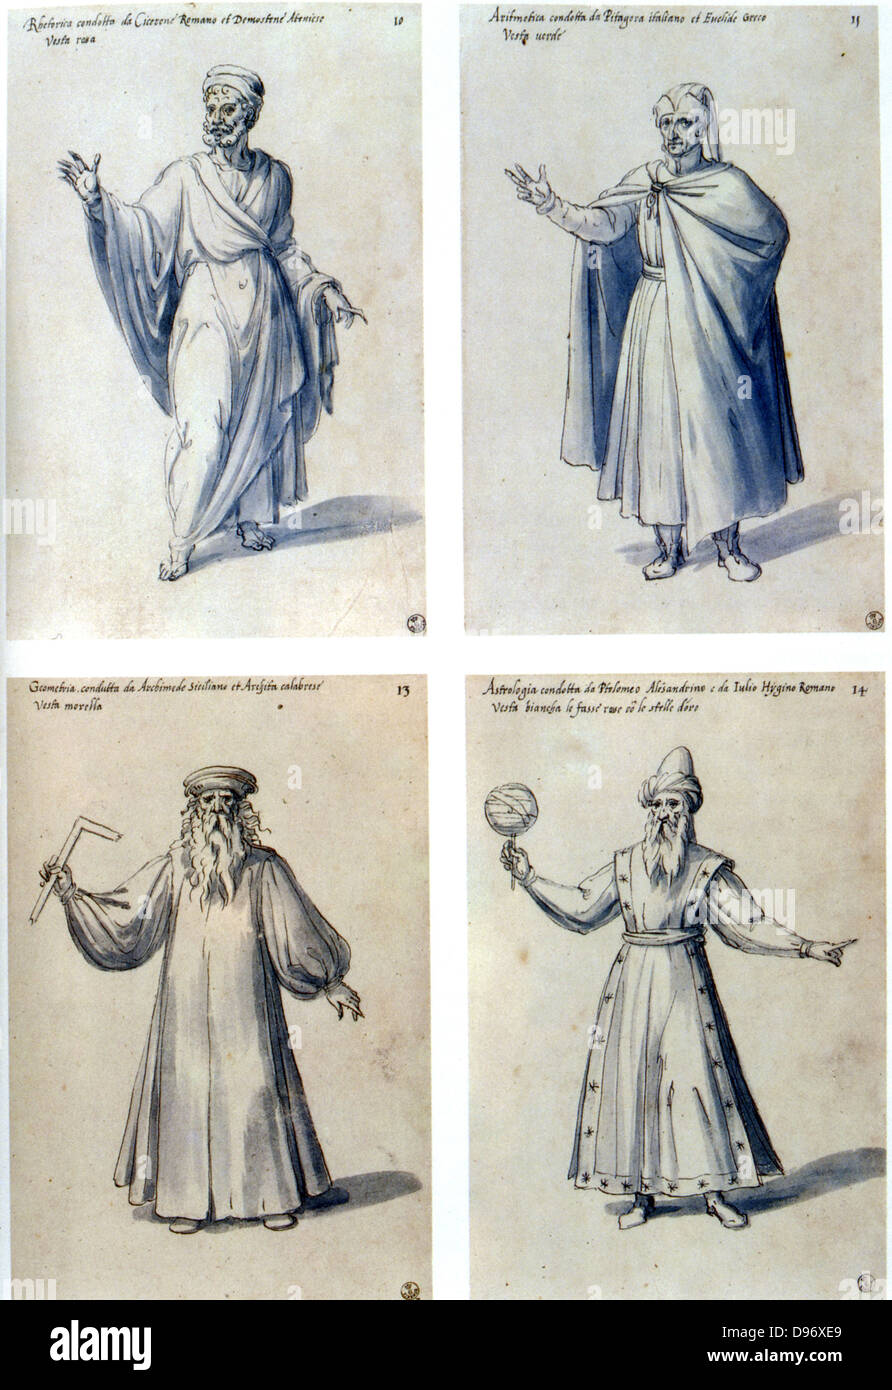 Costume design for classical figures. Top L: Cicero. Top R: Euclid. Bottom L: Archimedes. Bot. R: Ptolemy of Alexandria. Guiseppe Arcimboldo (c1530-1593) Italian painter. Pen, blue ink and watercolour on paper. Stock Photo